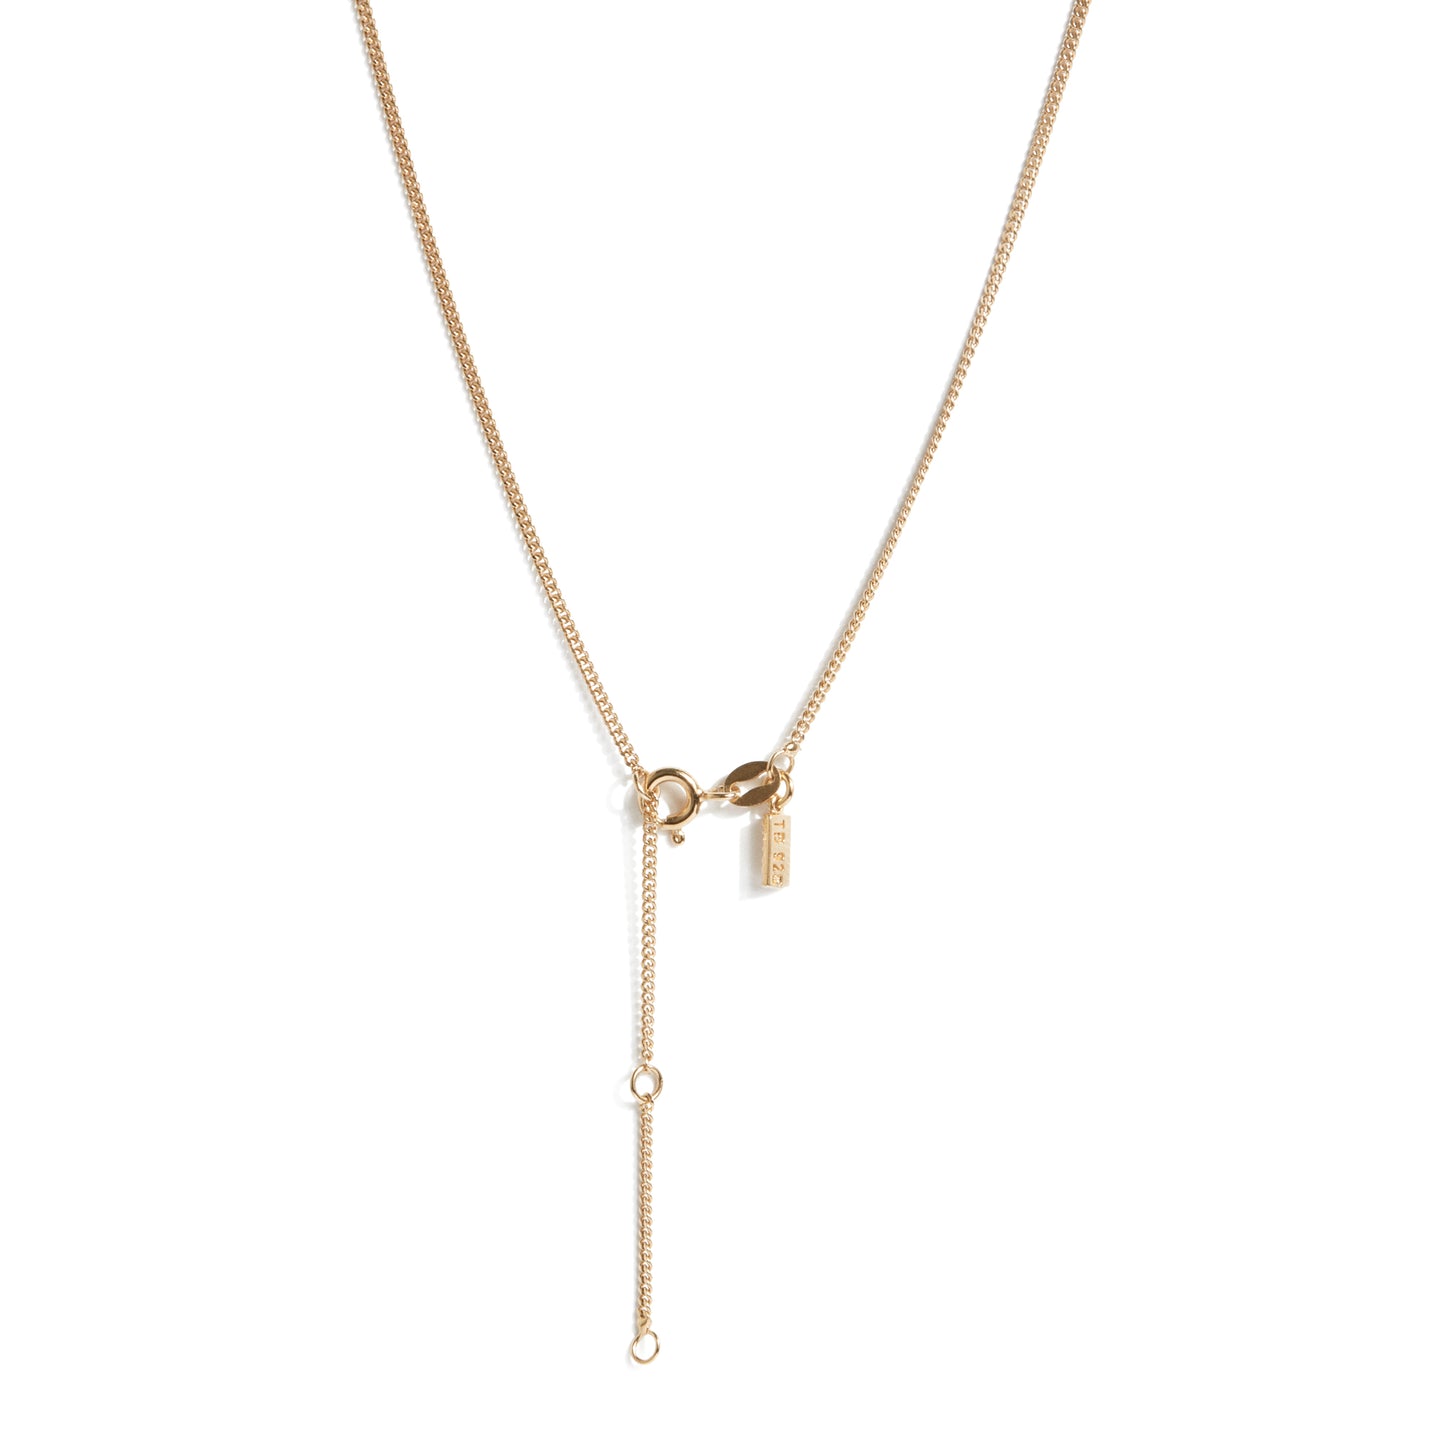 DELICATE CURB NECKLACE IN GOLD